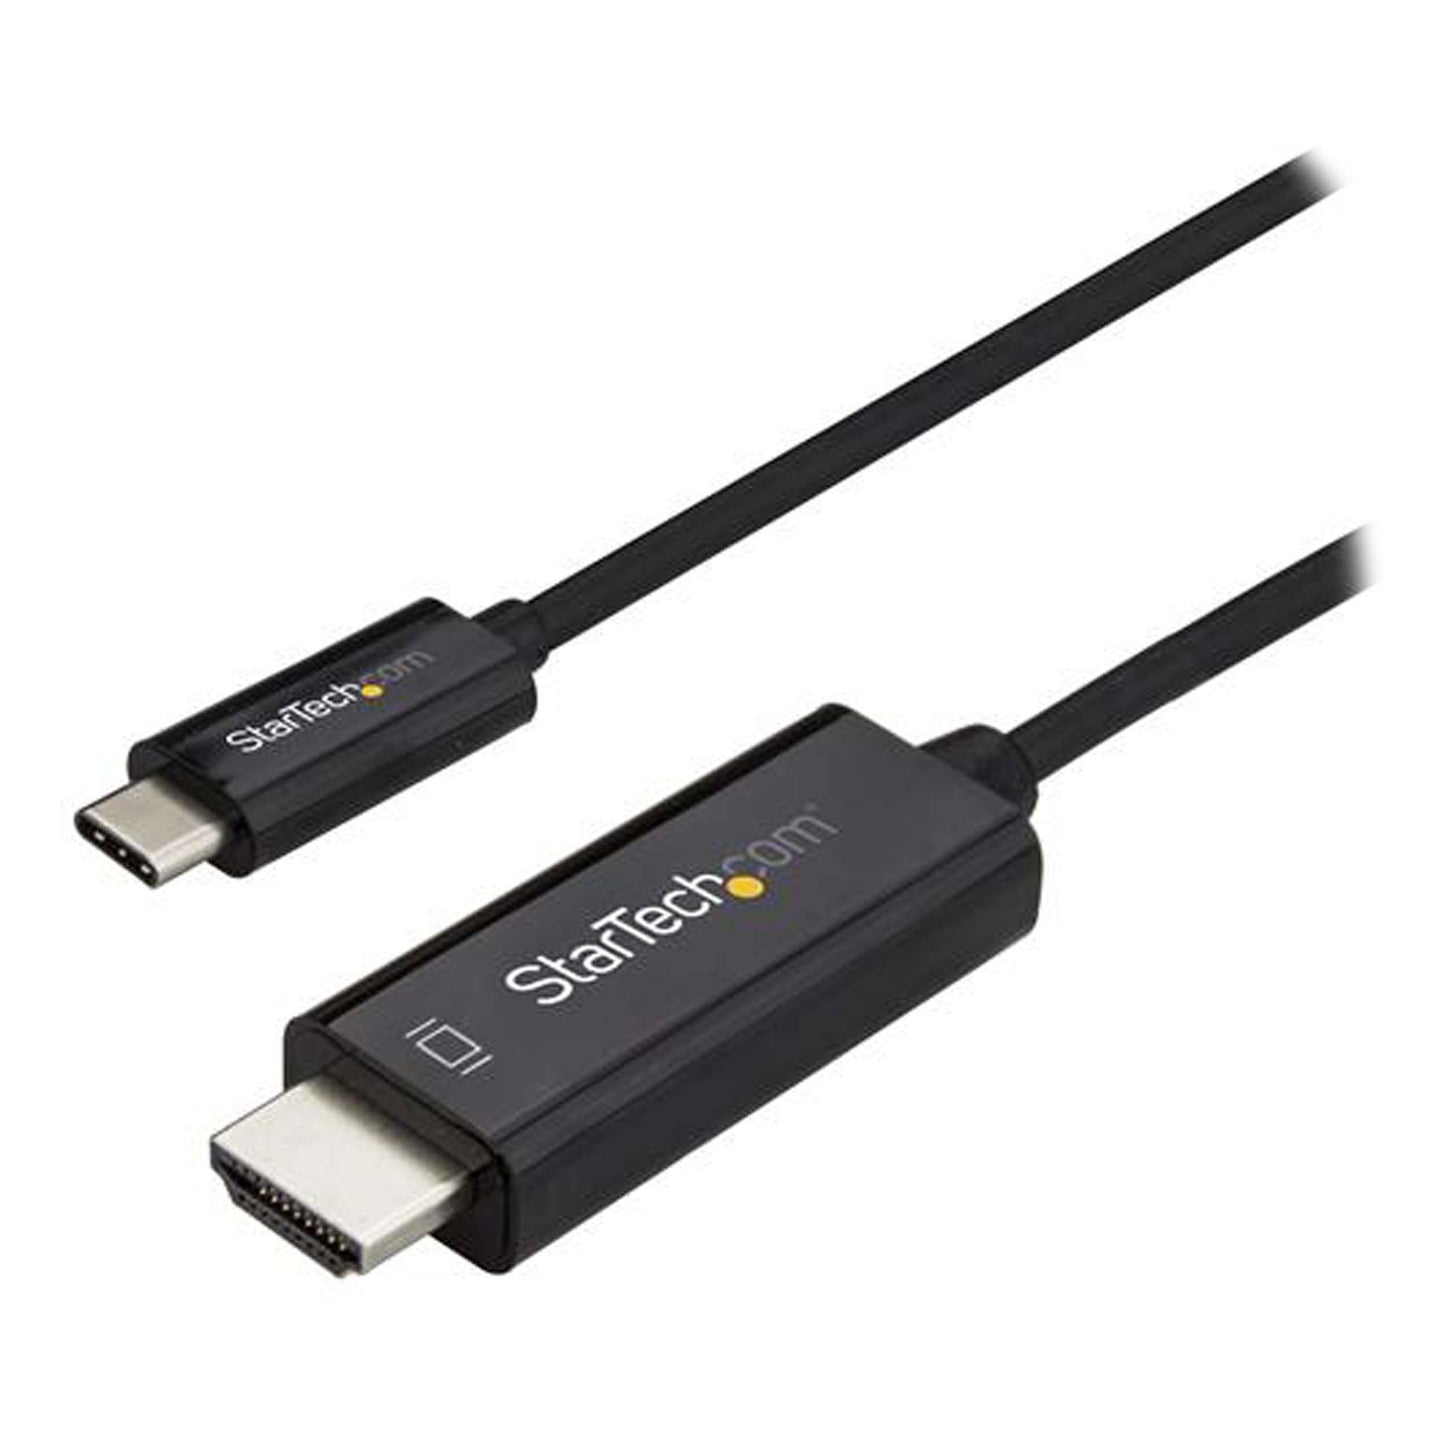 Startech 2m (6 Ft.) USB-C to HDMI Cable - 4K At 60 Hz - Black